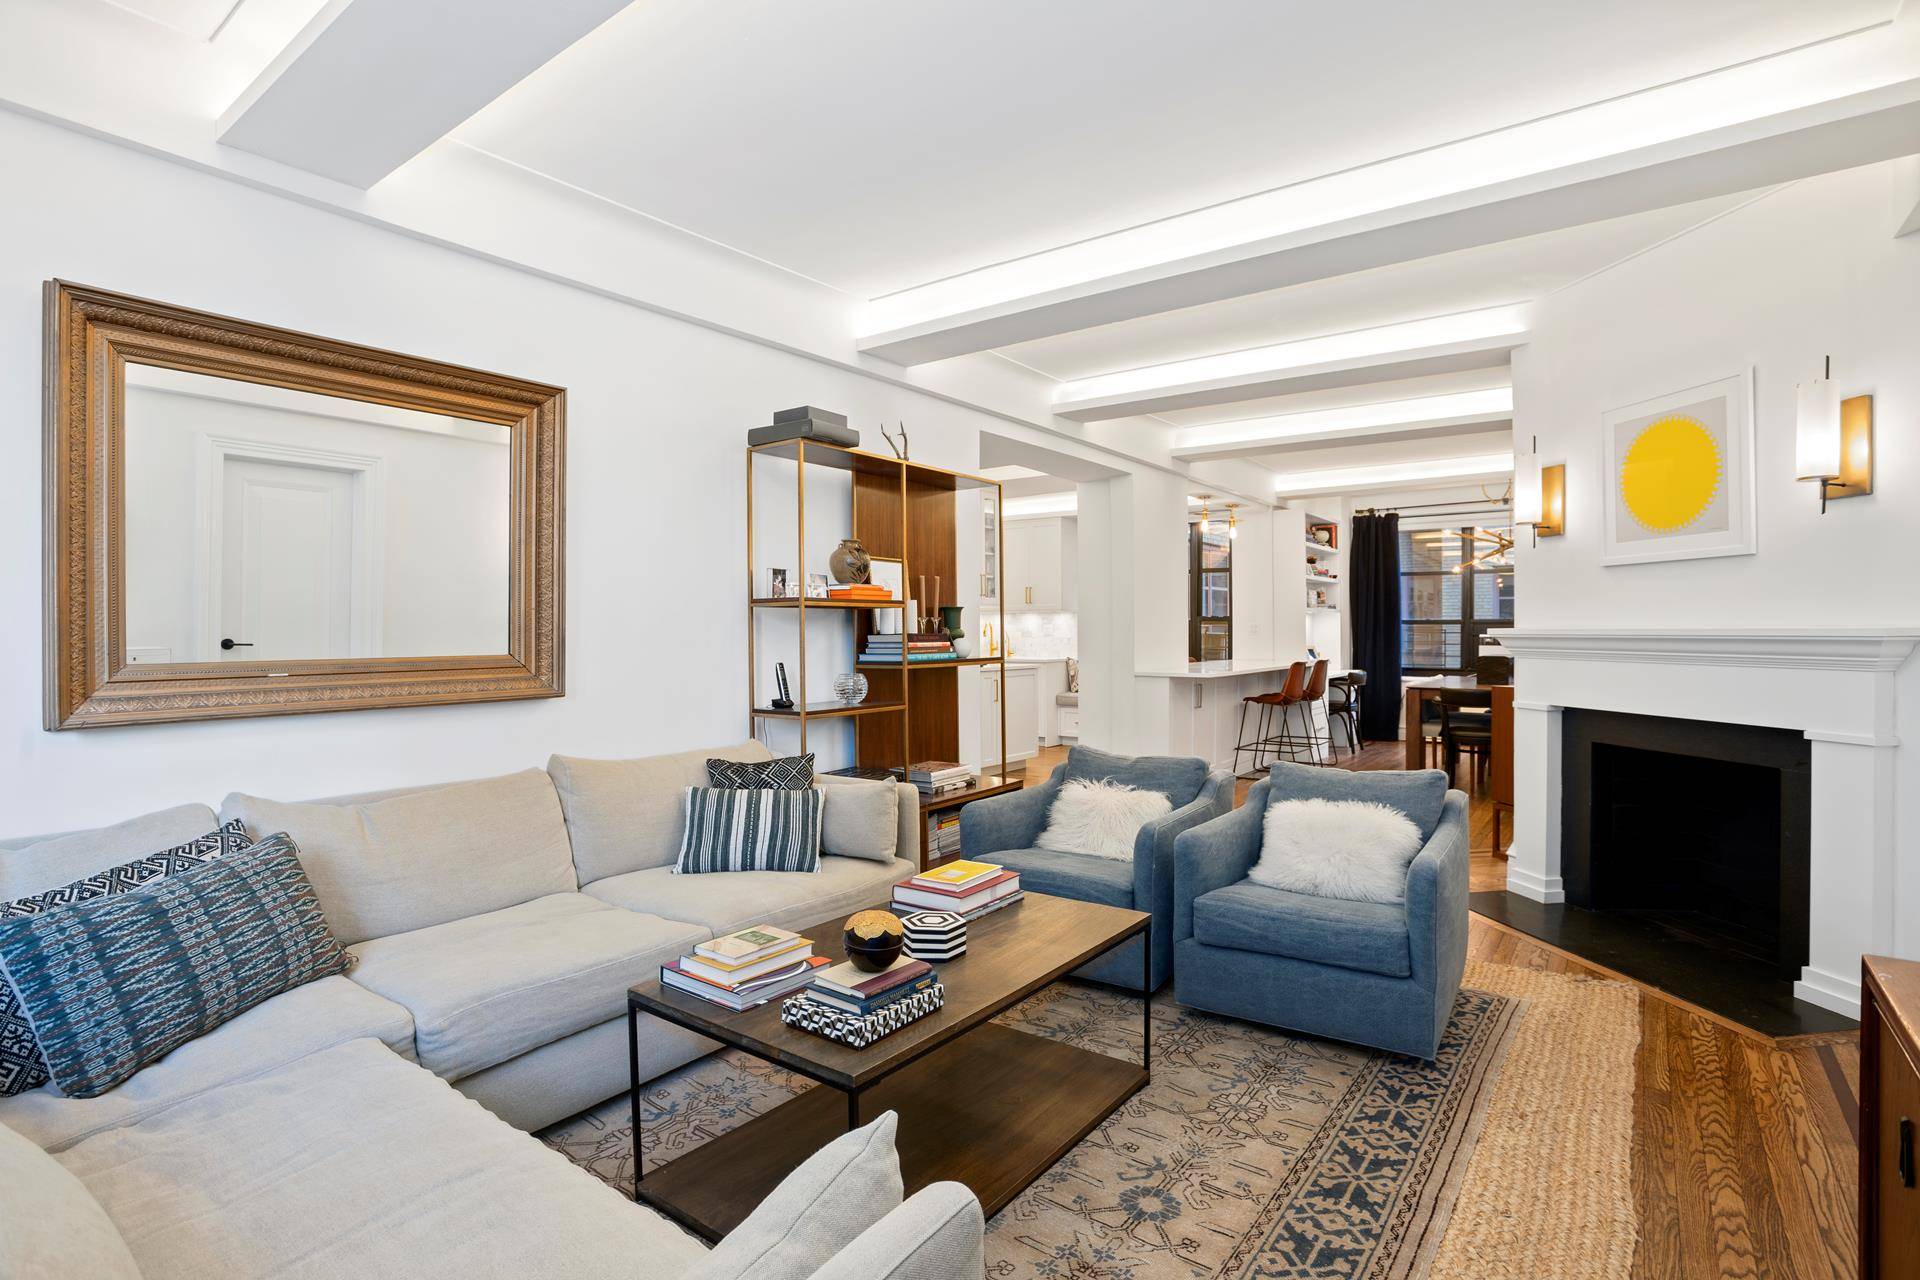 Welcome home to your completely gut renovated 3 bedroom 2 bathroom apartment in the Gramercy House, a gorgeous Art Deco building in the heart of Gramercy.